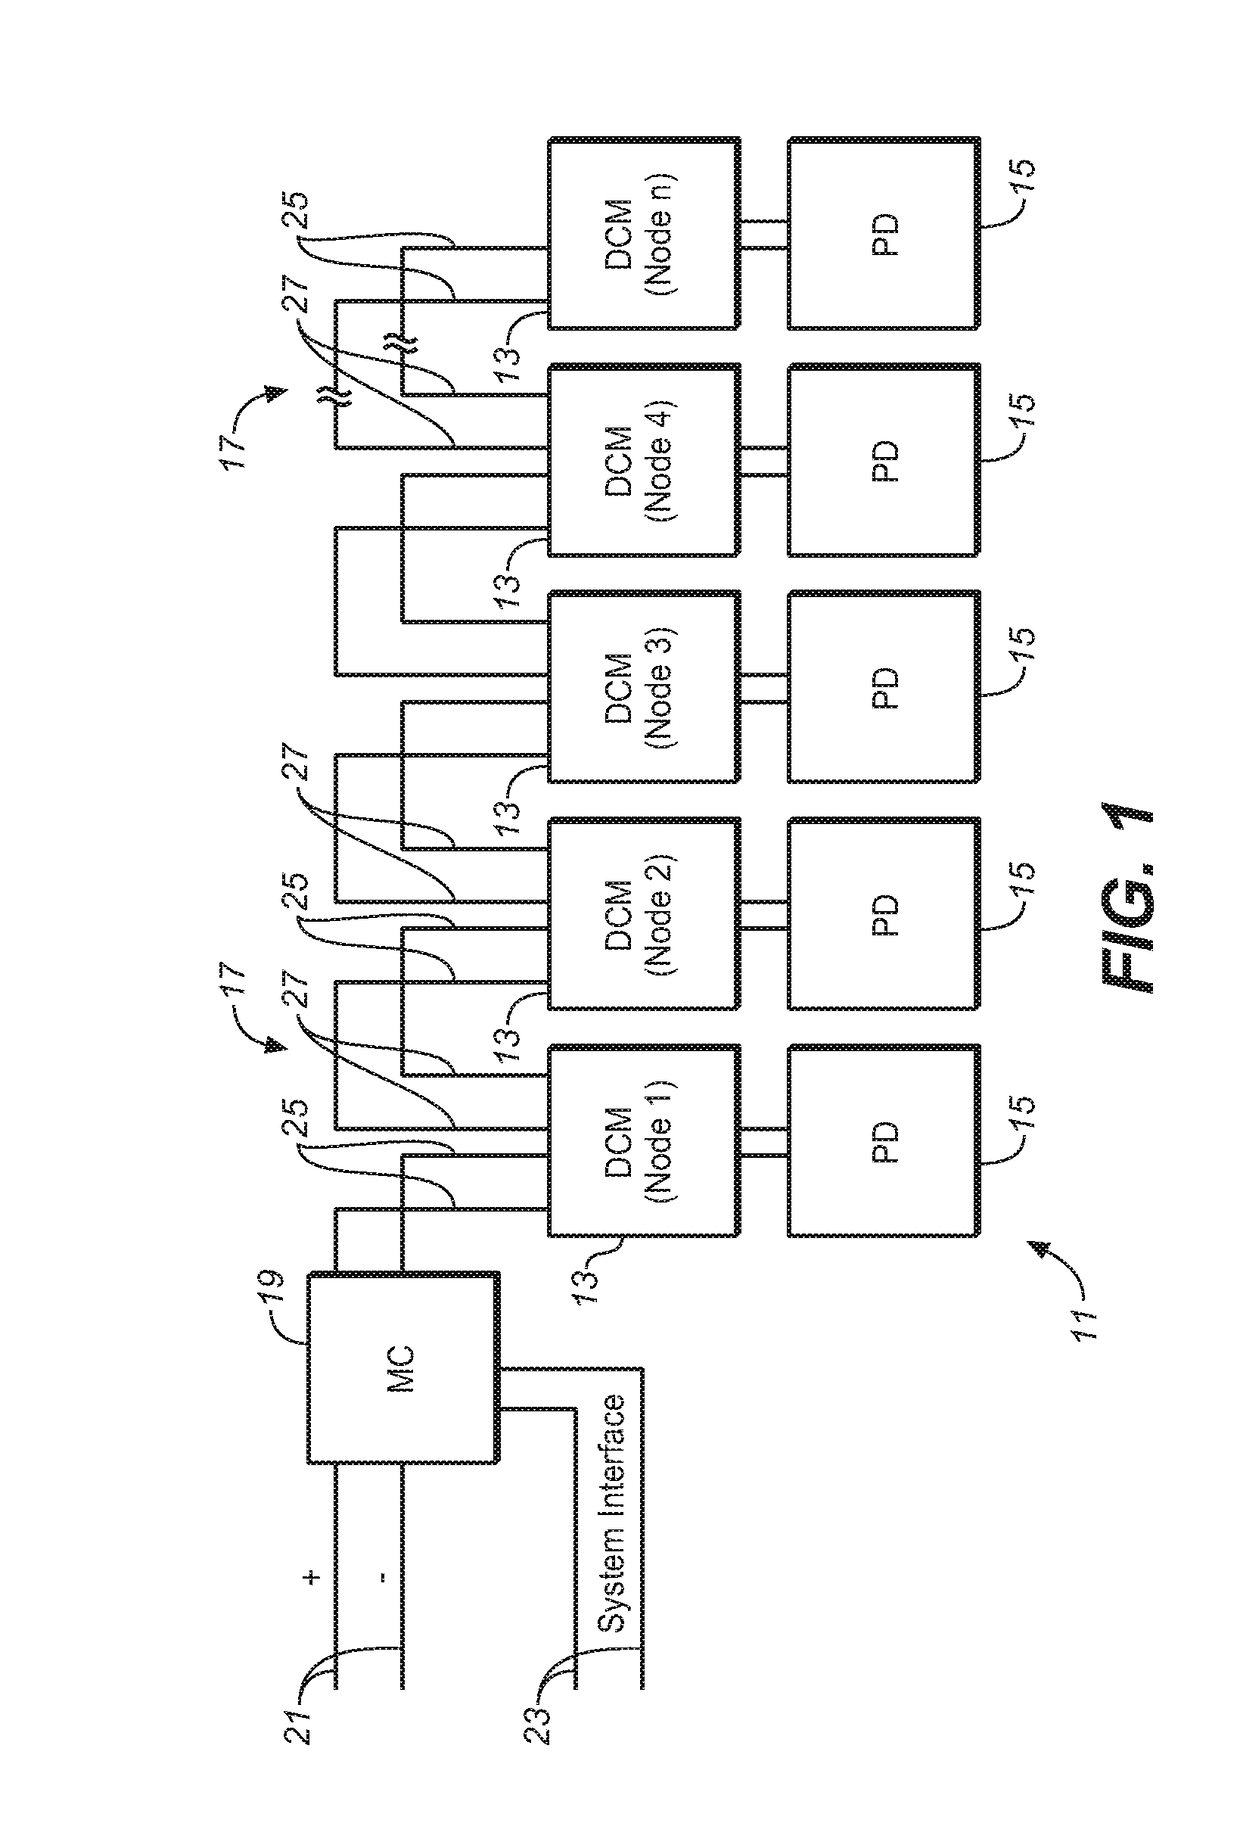 Power line communication system and method of auto-commissioning system nodes